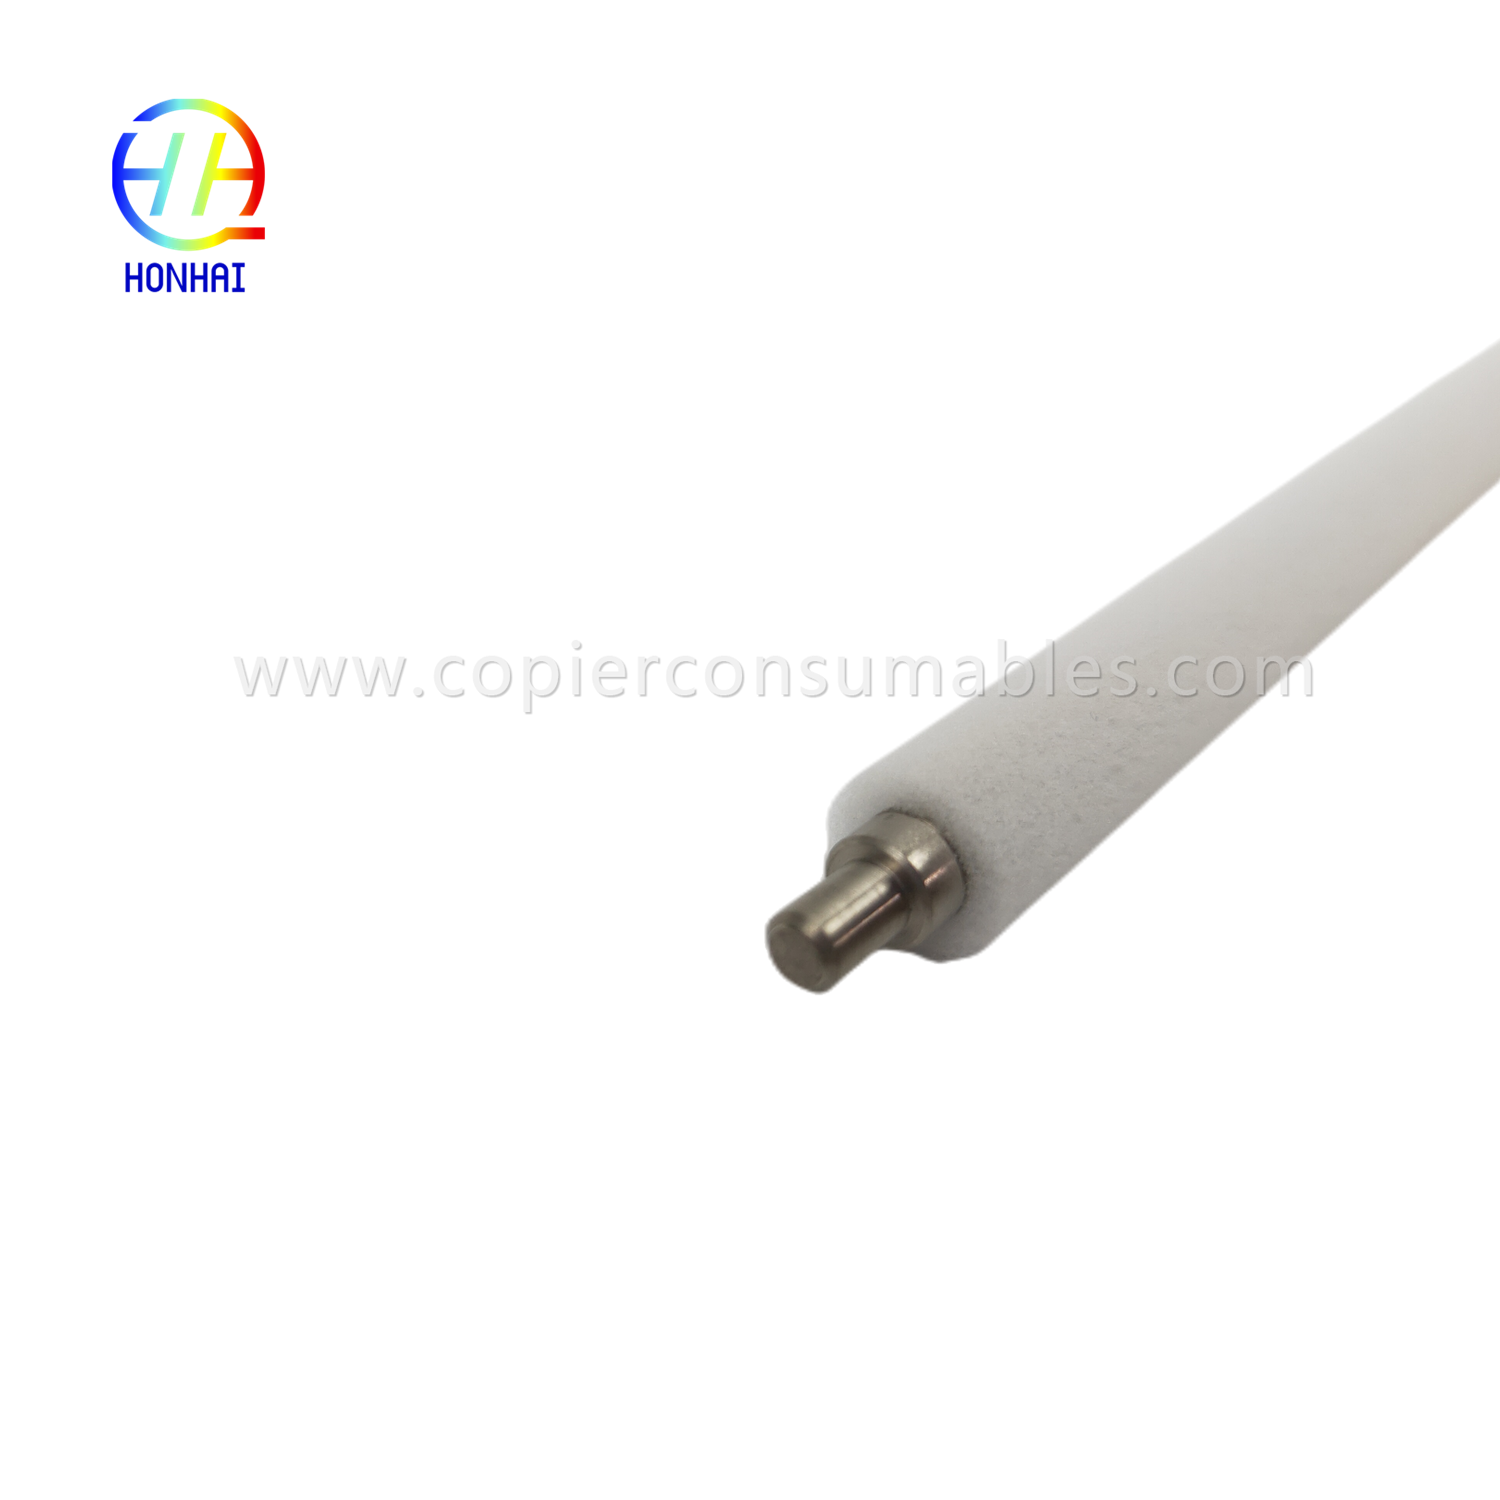 https://www.copierconsumables.com/pcr-cleaning-roller-for-ricoh-mpc3003-c3503-c4503-c5503-c6003-product/